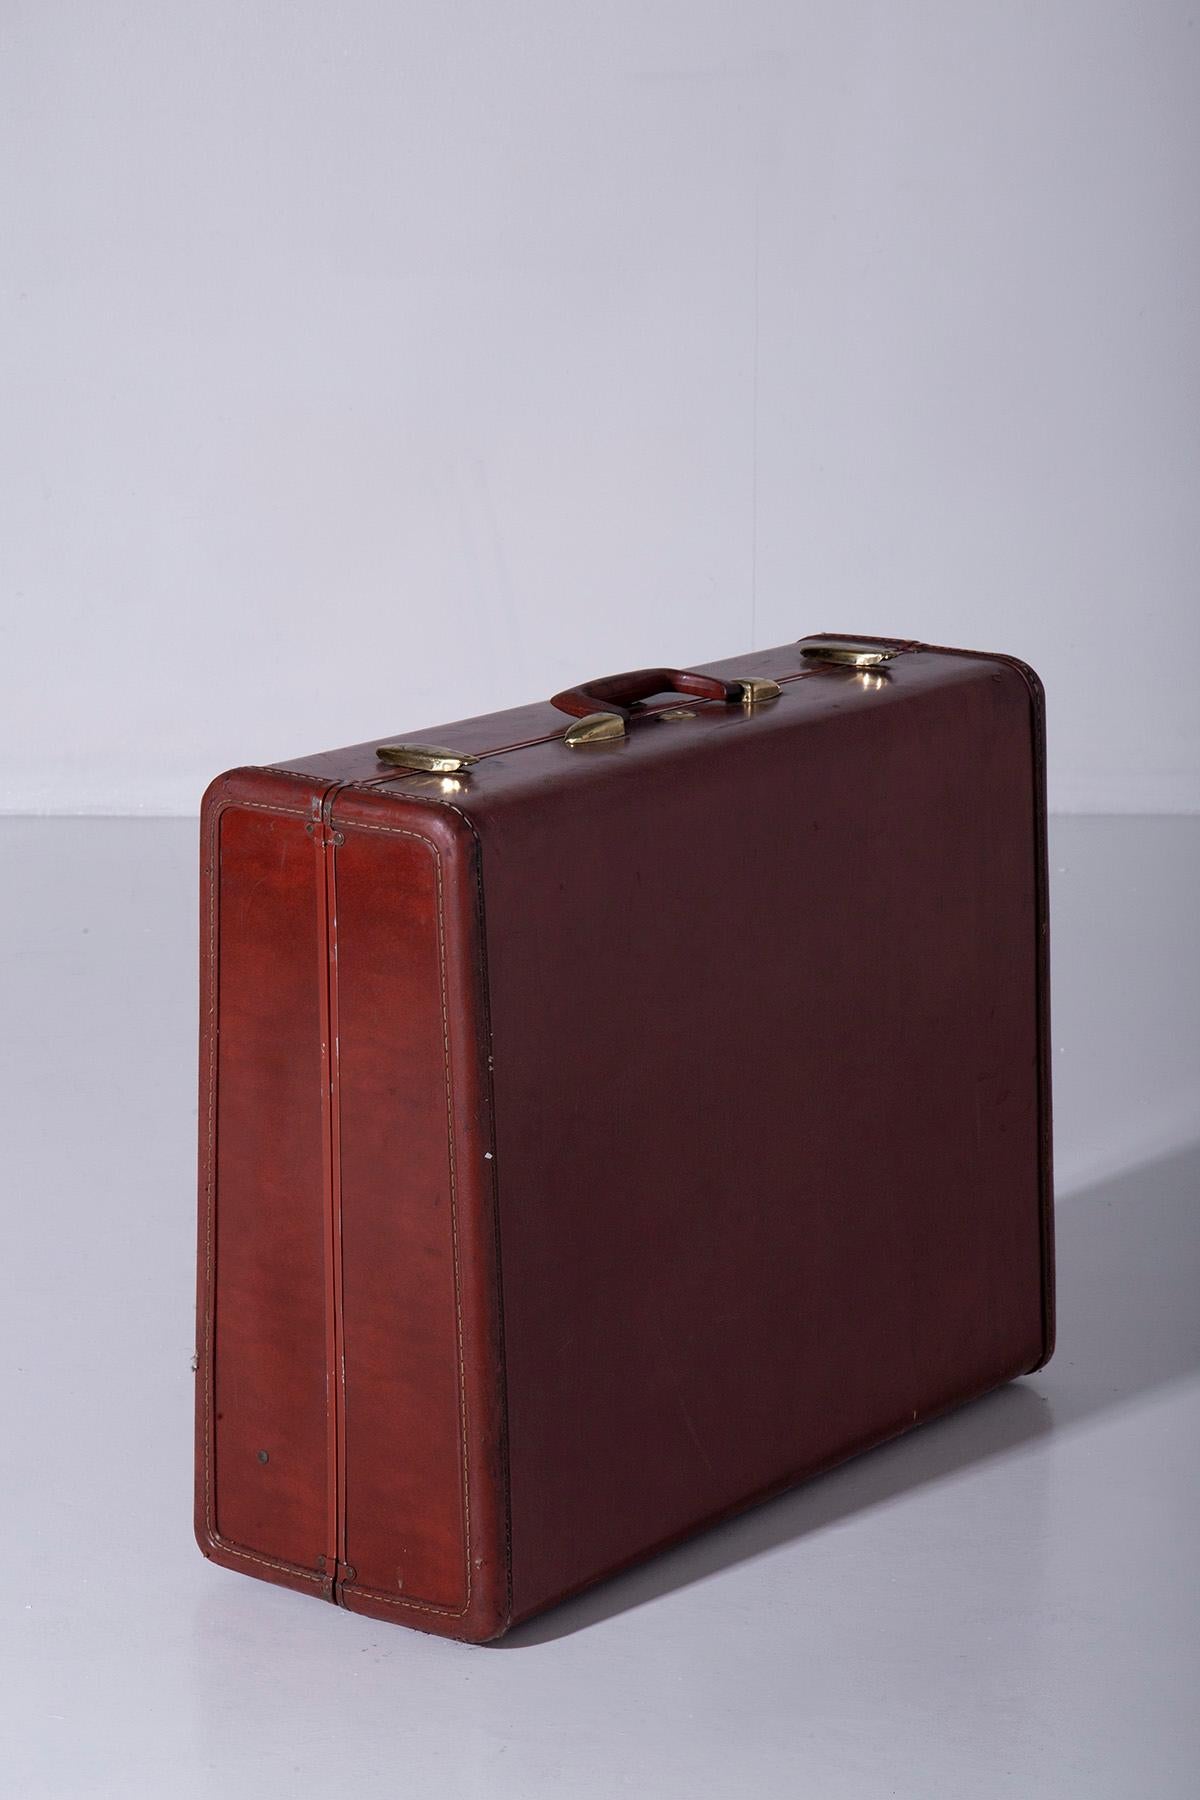 Samsonite Vintage Suitcases in leather In Good Condition For Sale In Milano, IT